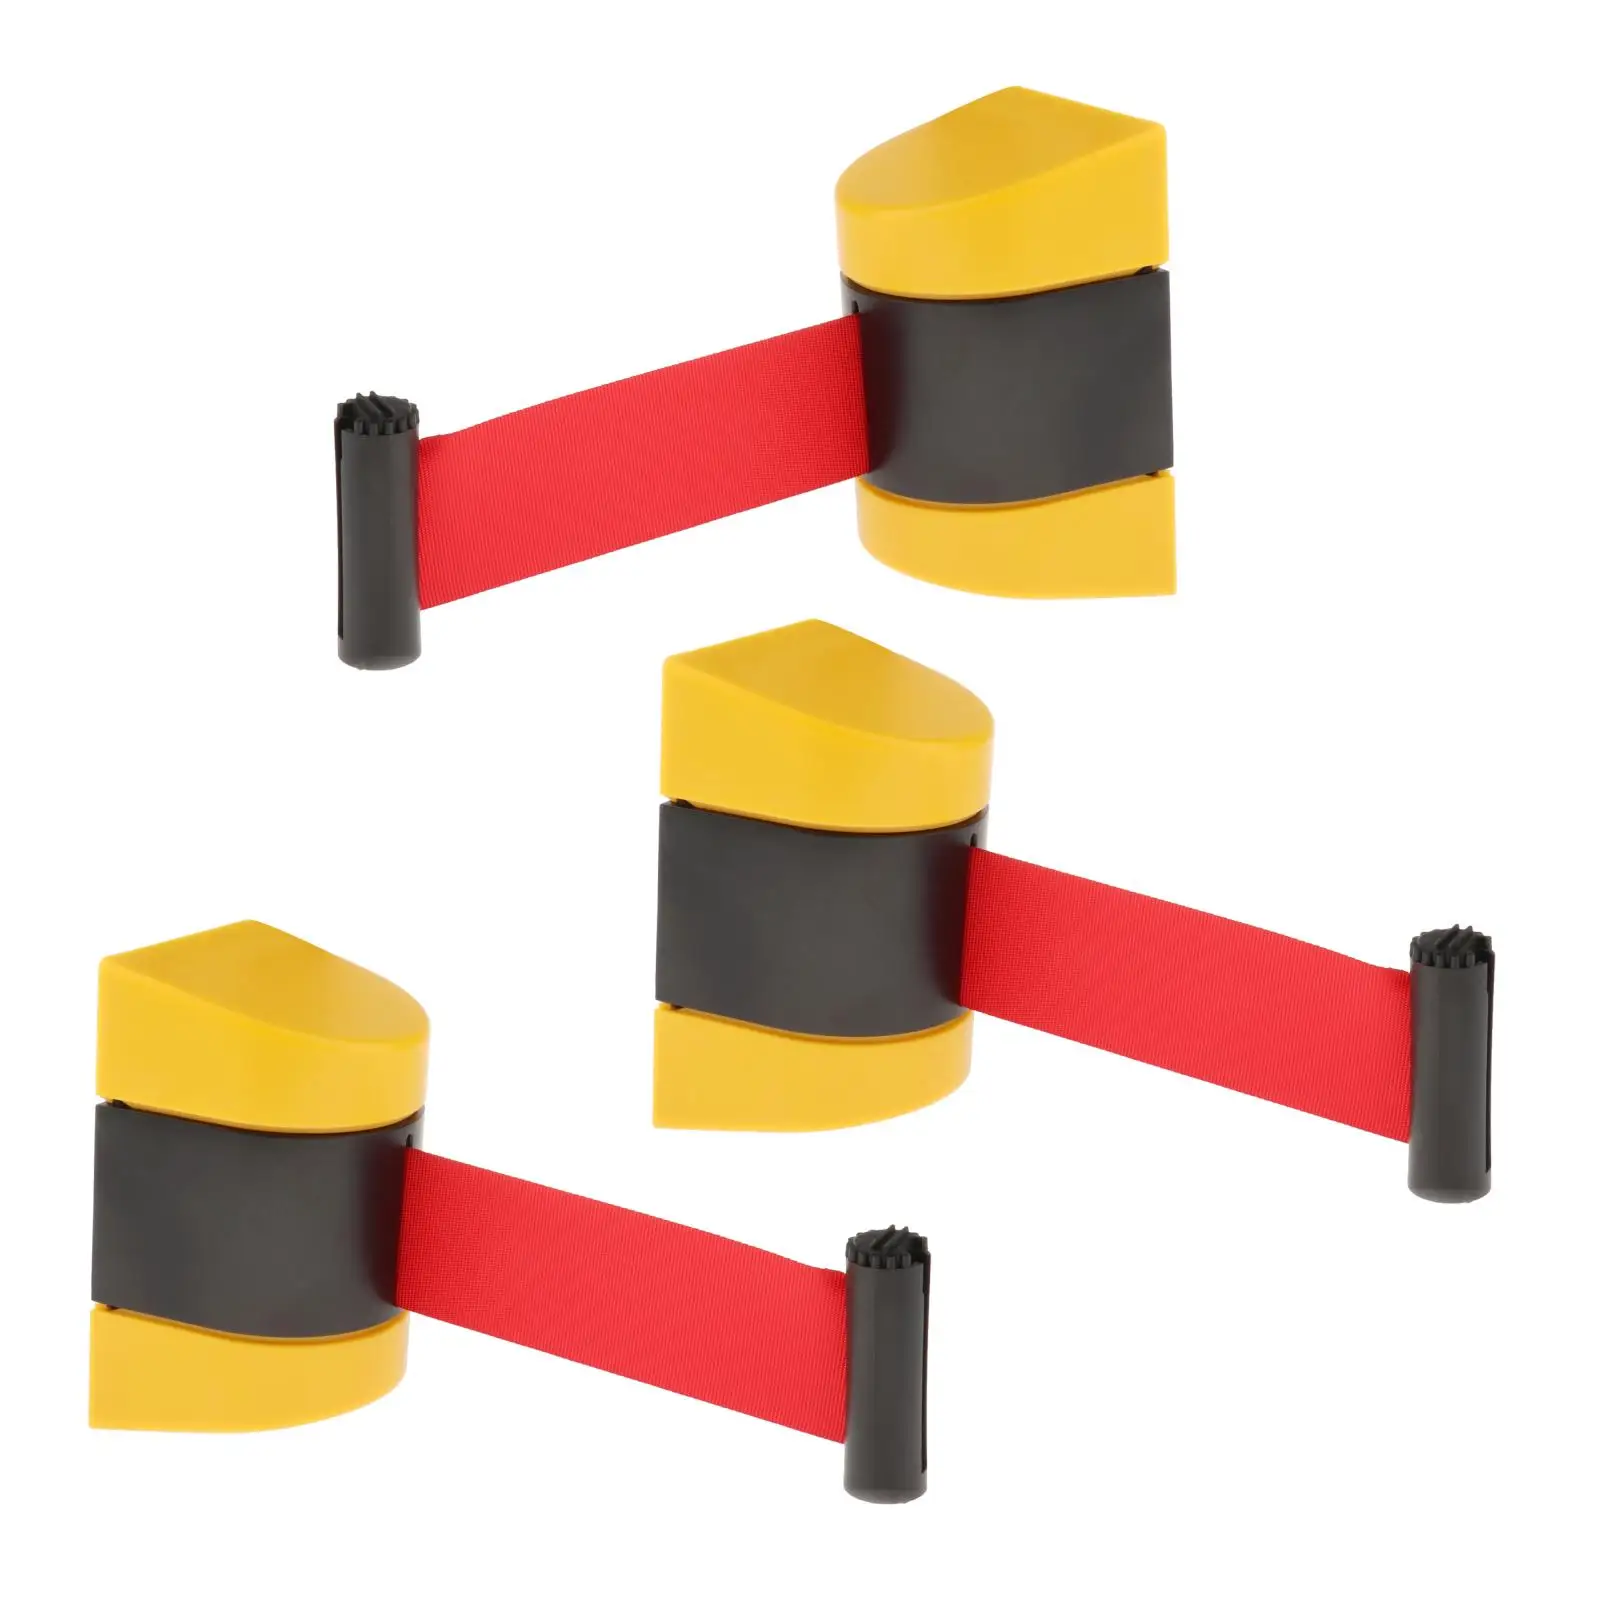 Details about   5m Retractable Barrier Tape Safety warehouse workshop crow control wall mount 